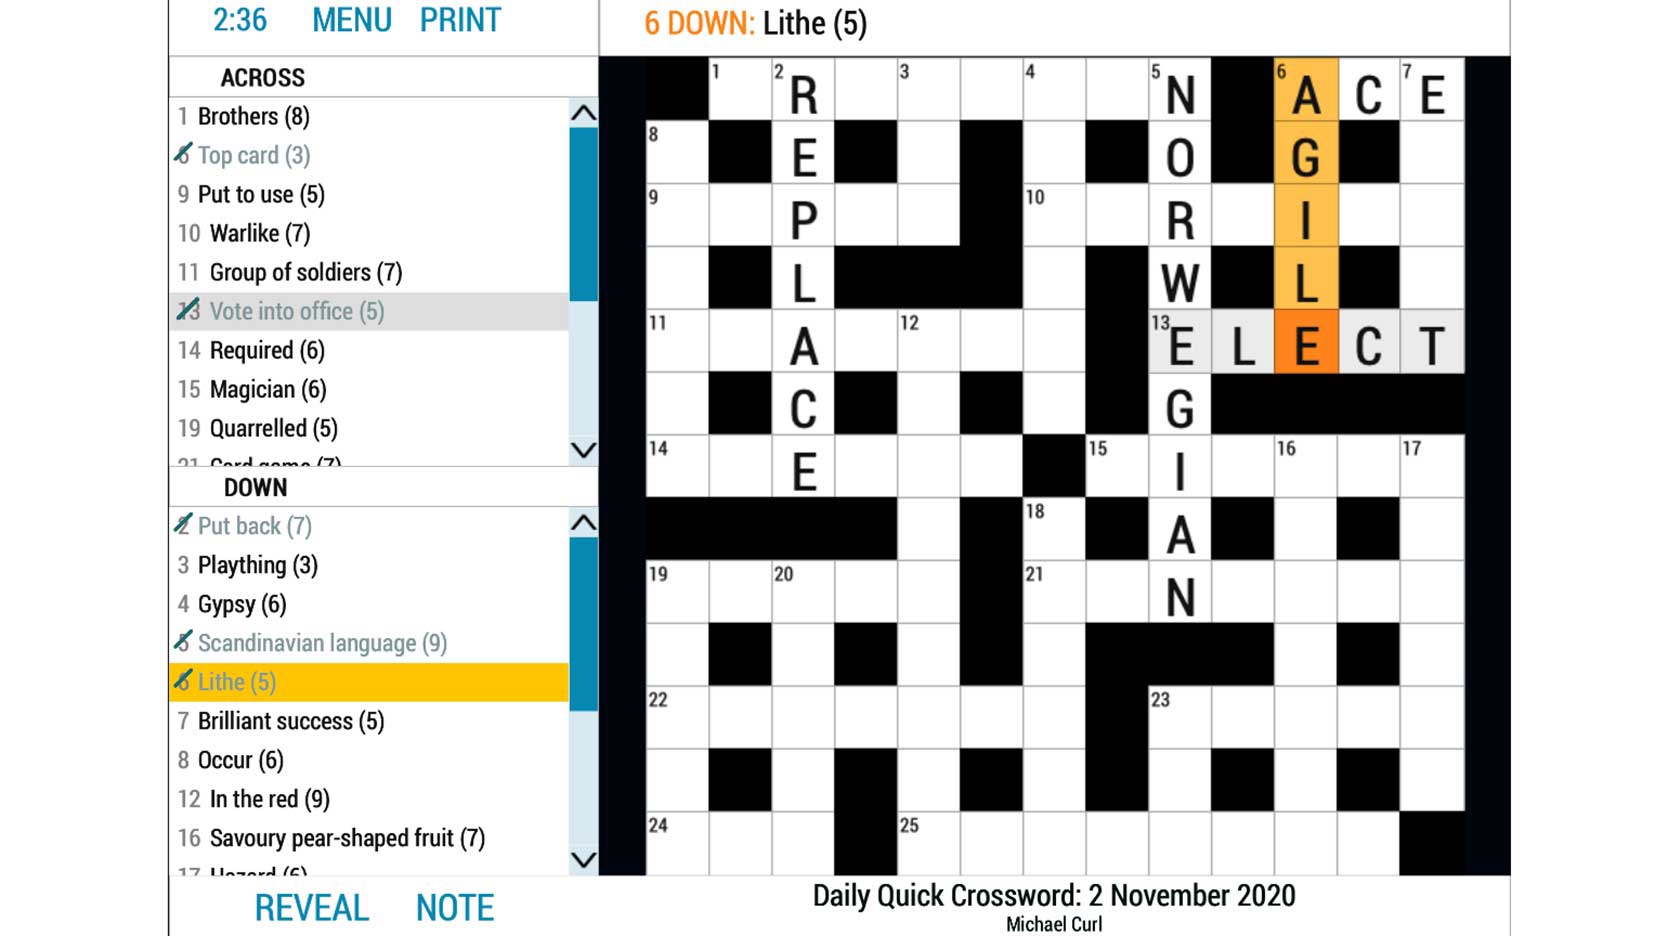 daily quick crossword online word game